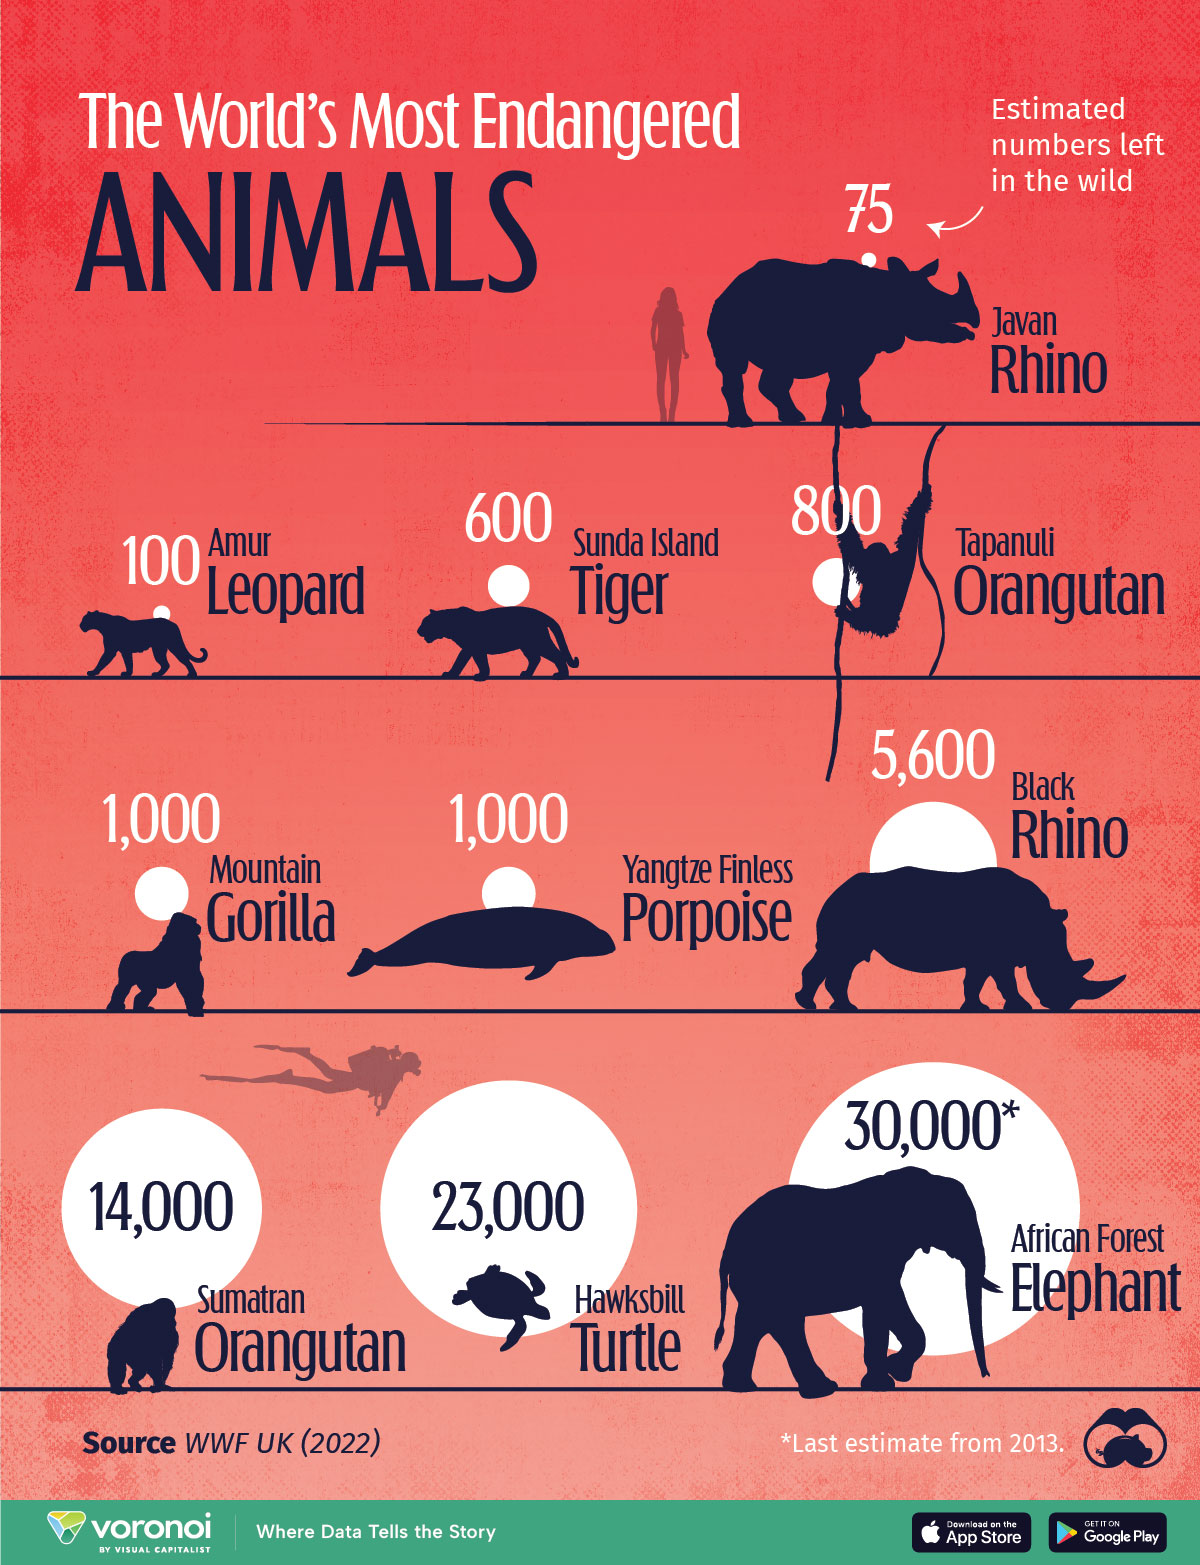 This graphic shows the most endangered animals by numbers found in the wild, per estimates from the World Wildlife Fund (WWF) UK.